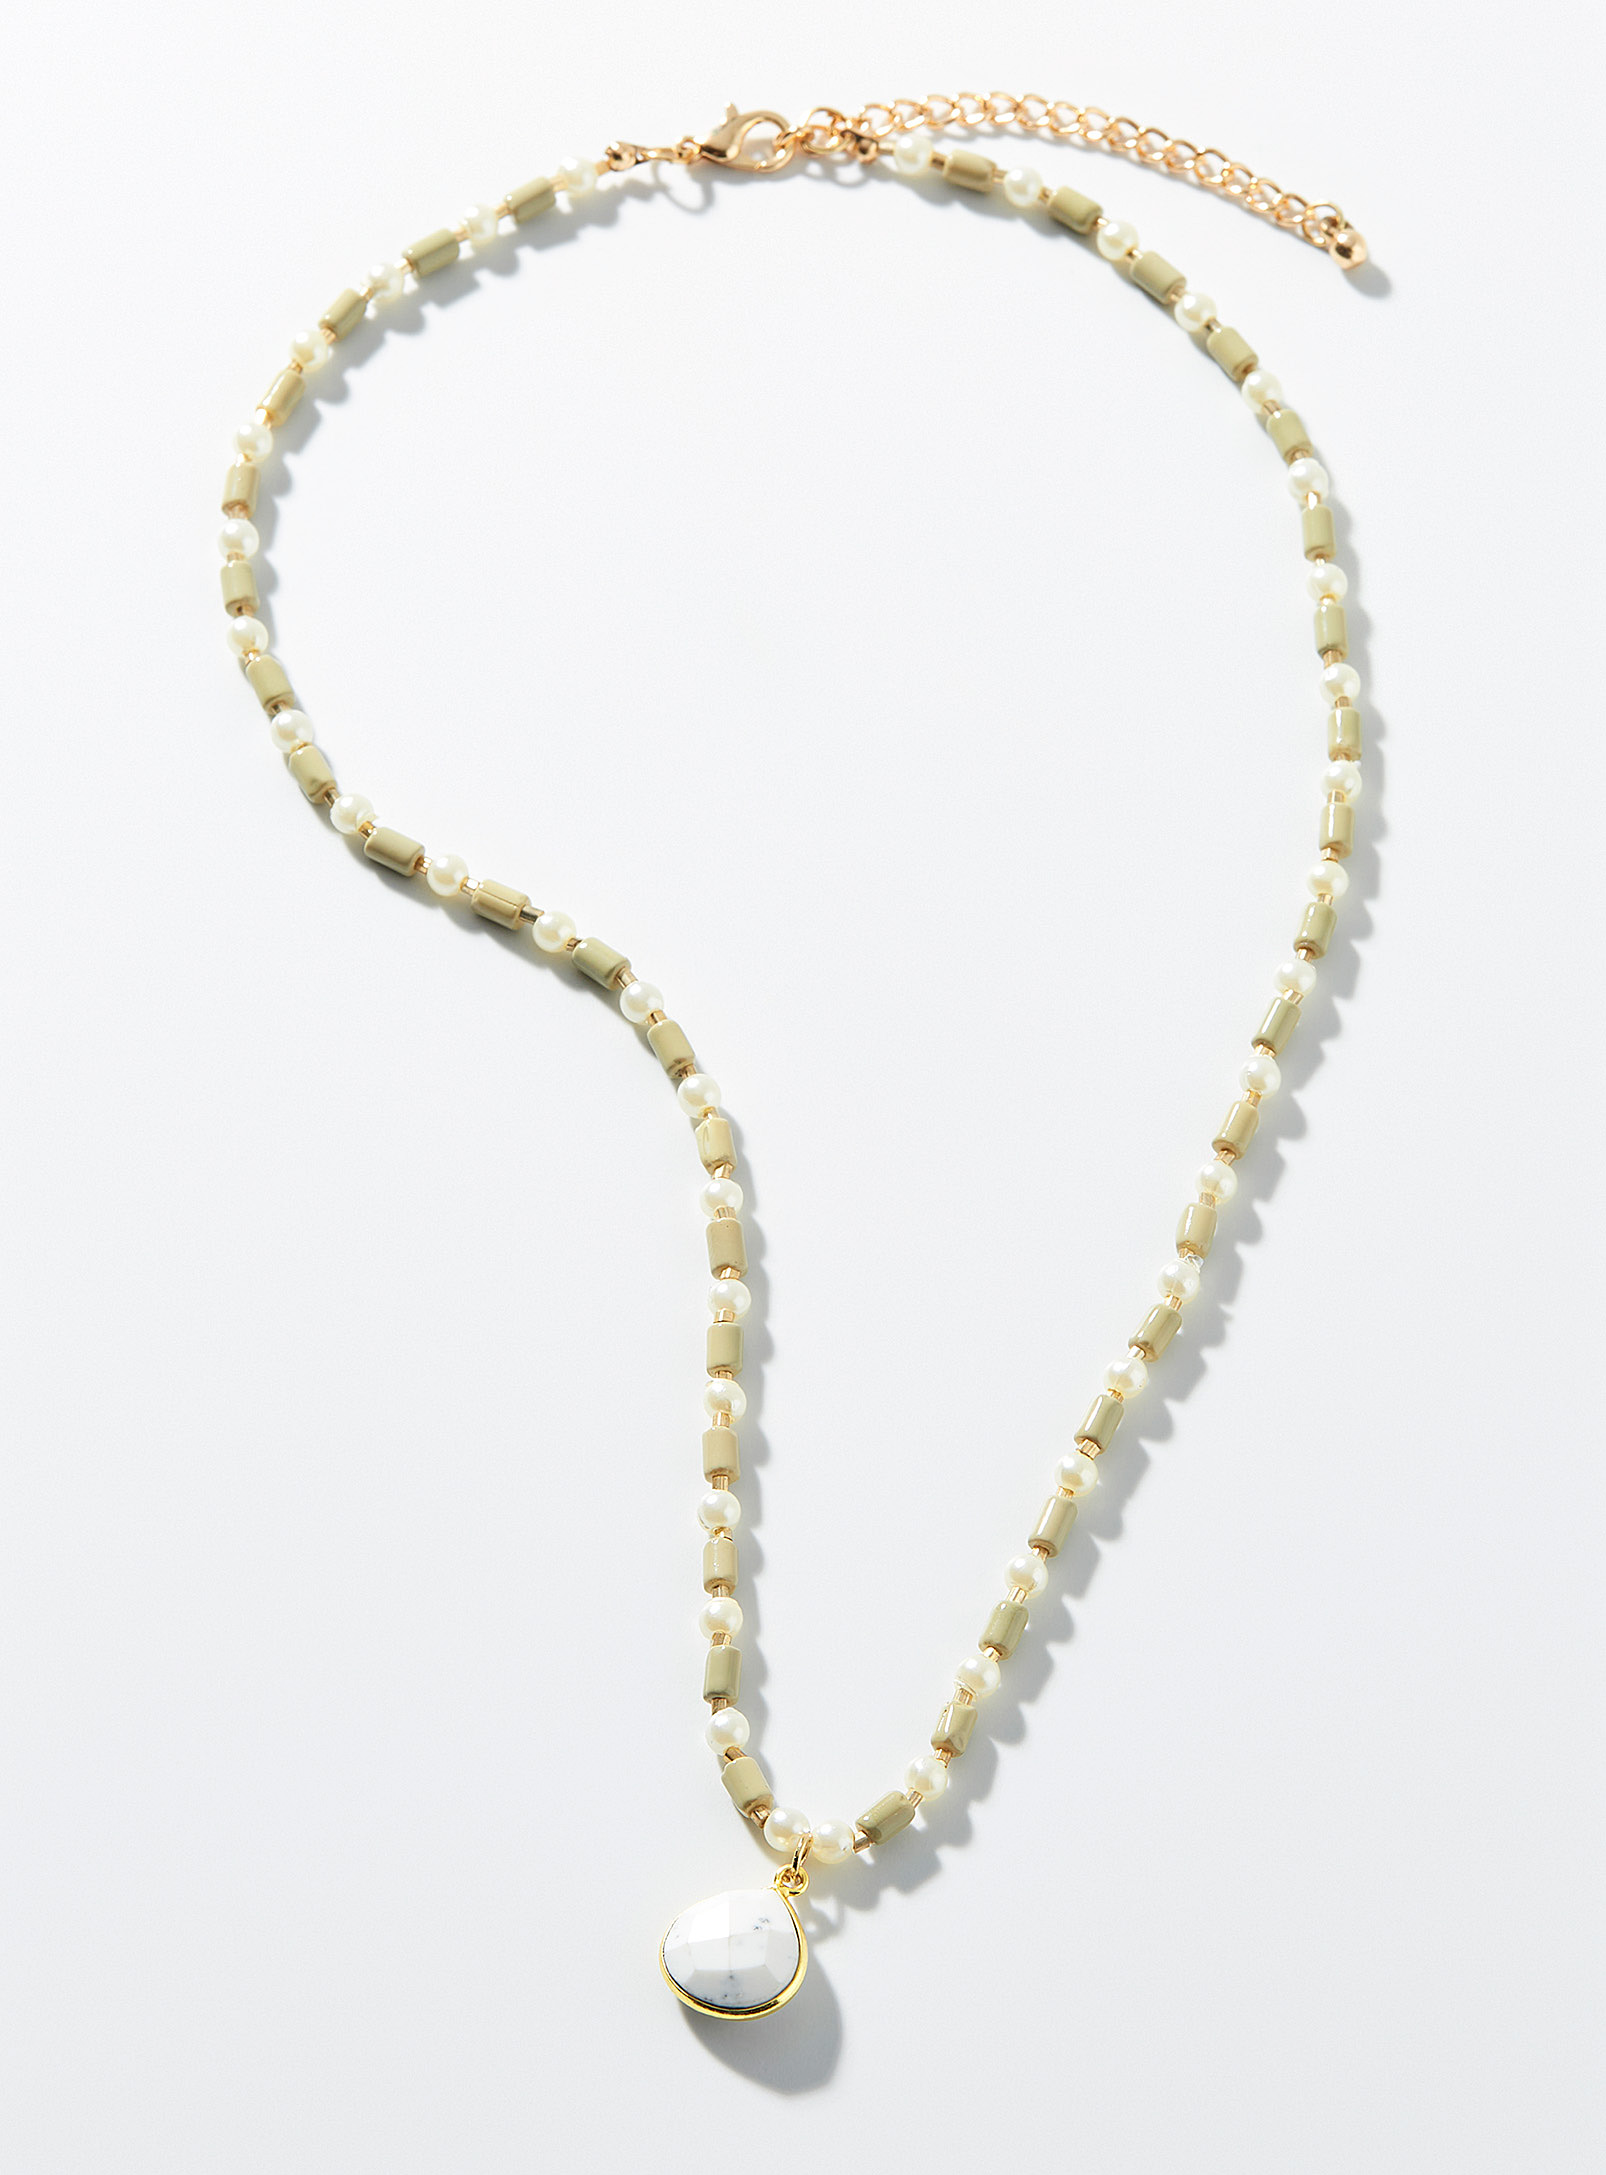 Simons - Women's Pearly bead and natural stone necklace